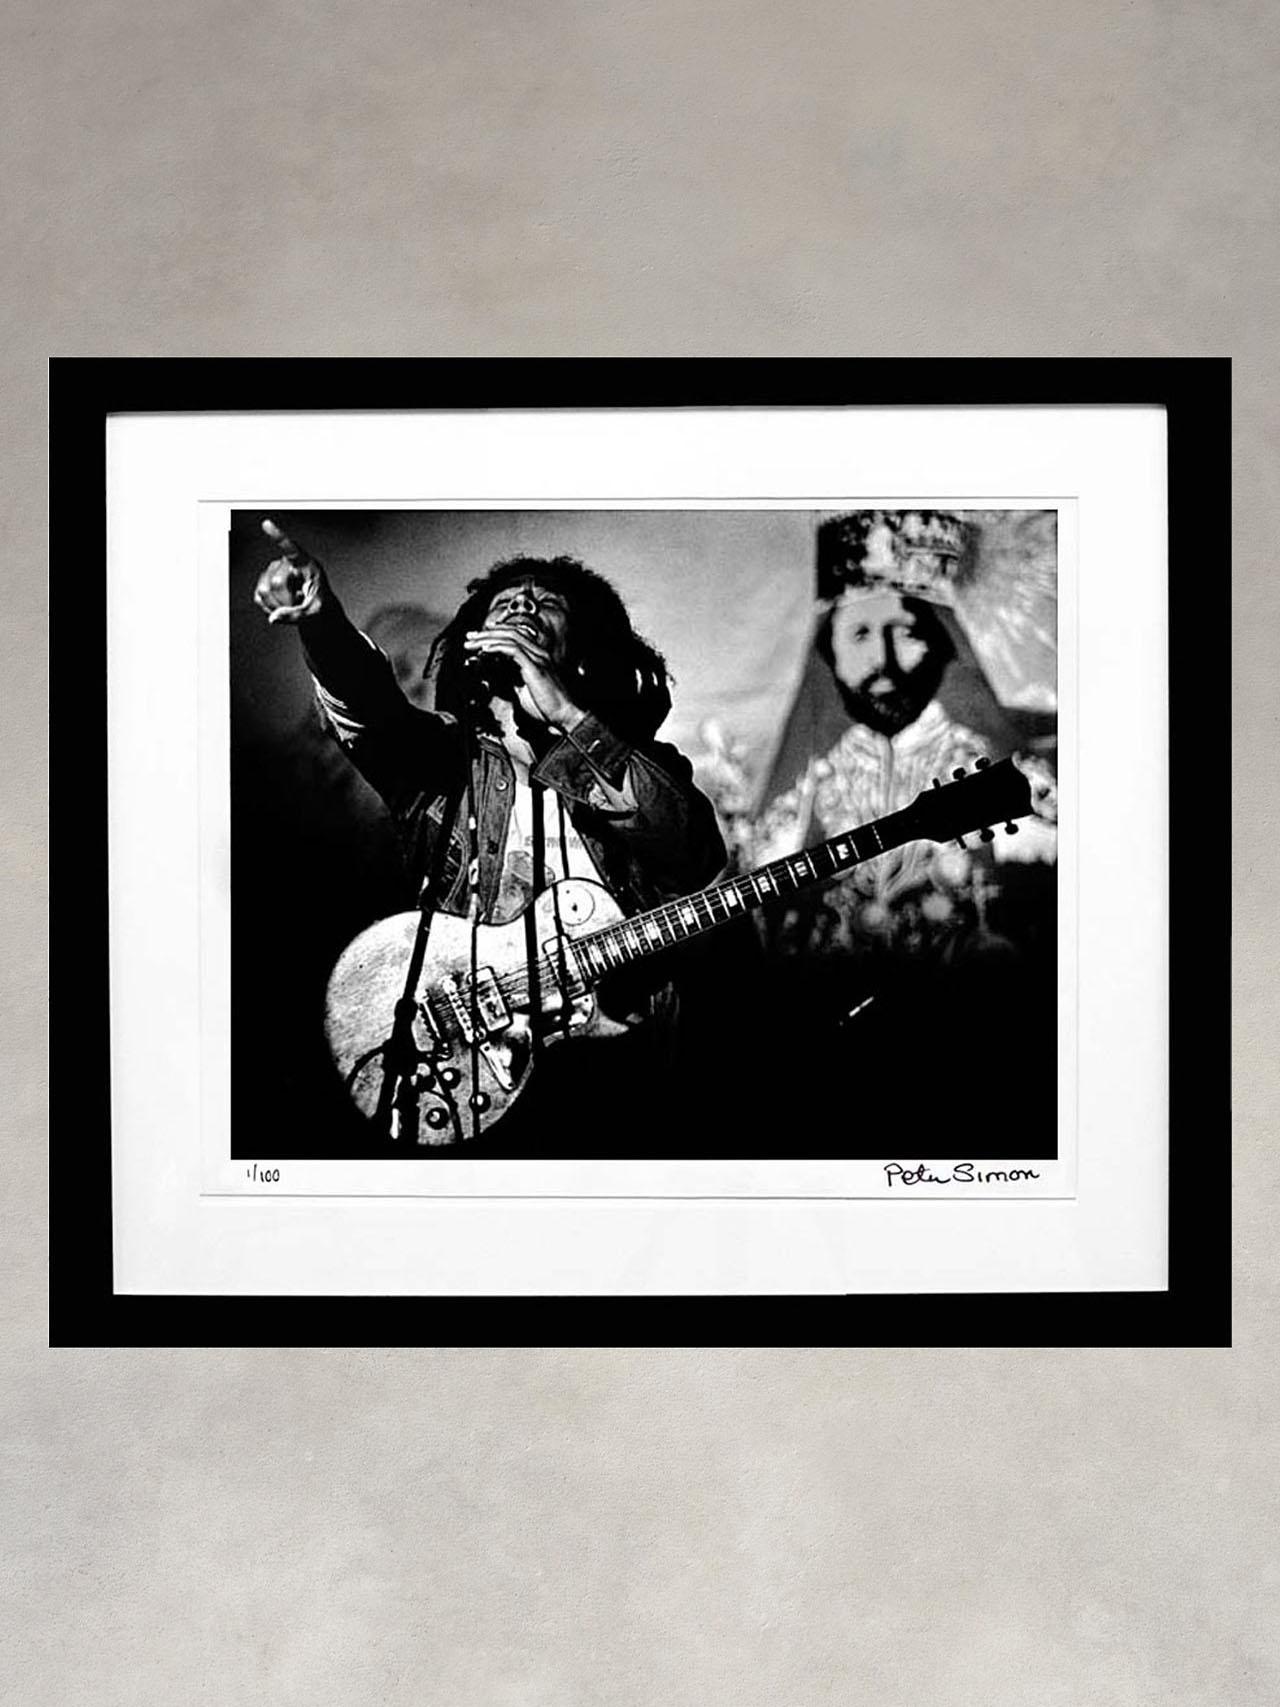 Bob Marley by Peter Simon image number 1